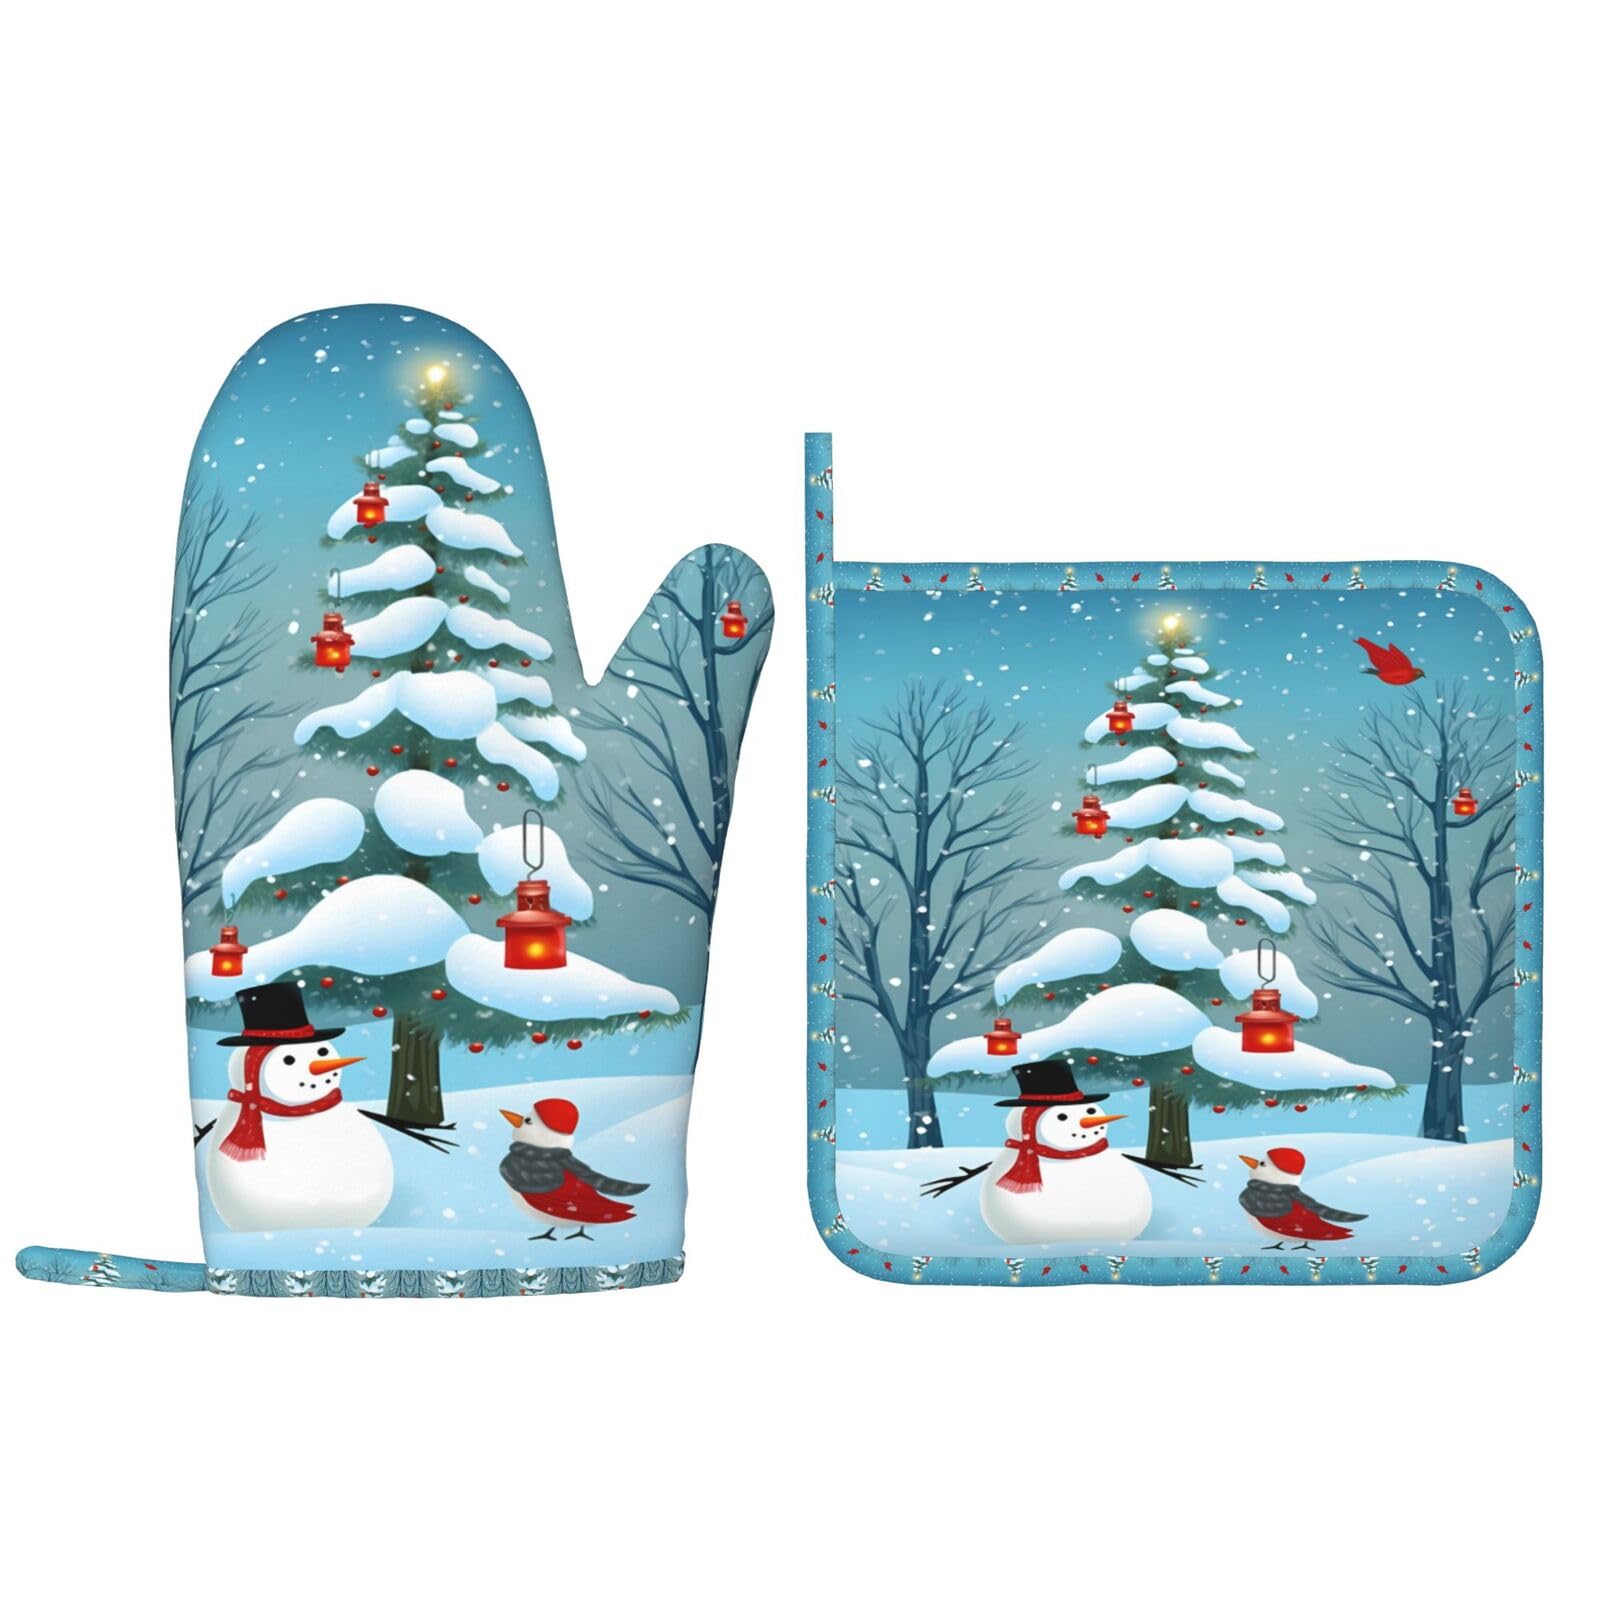 Oven Mitts Pot Holders Sets Christmas Snowman Birds Silicone Oven Gloves Winter Tree Kitchen Accessories for Baking Cooking Grilling